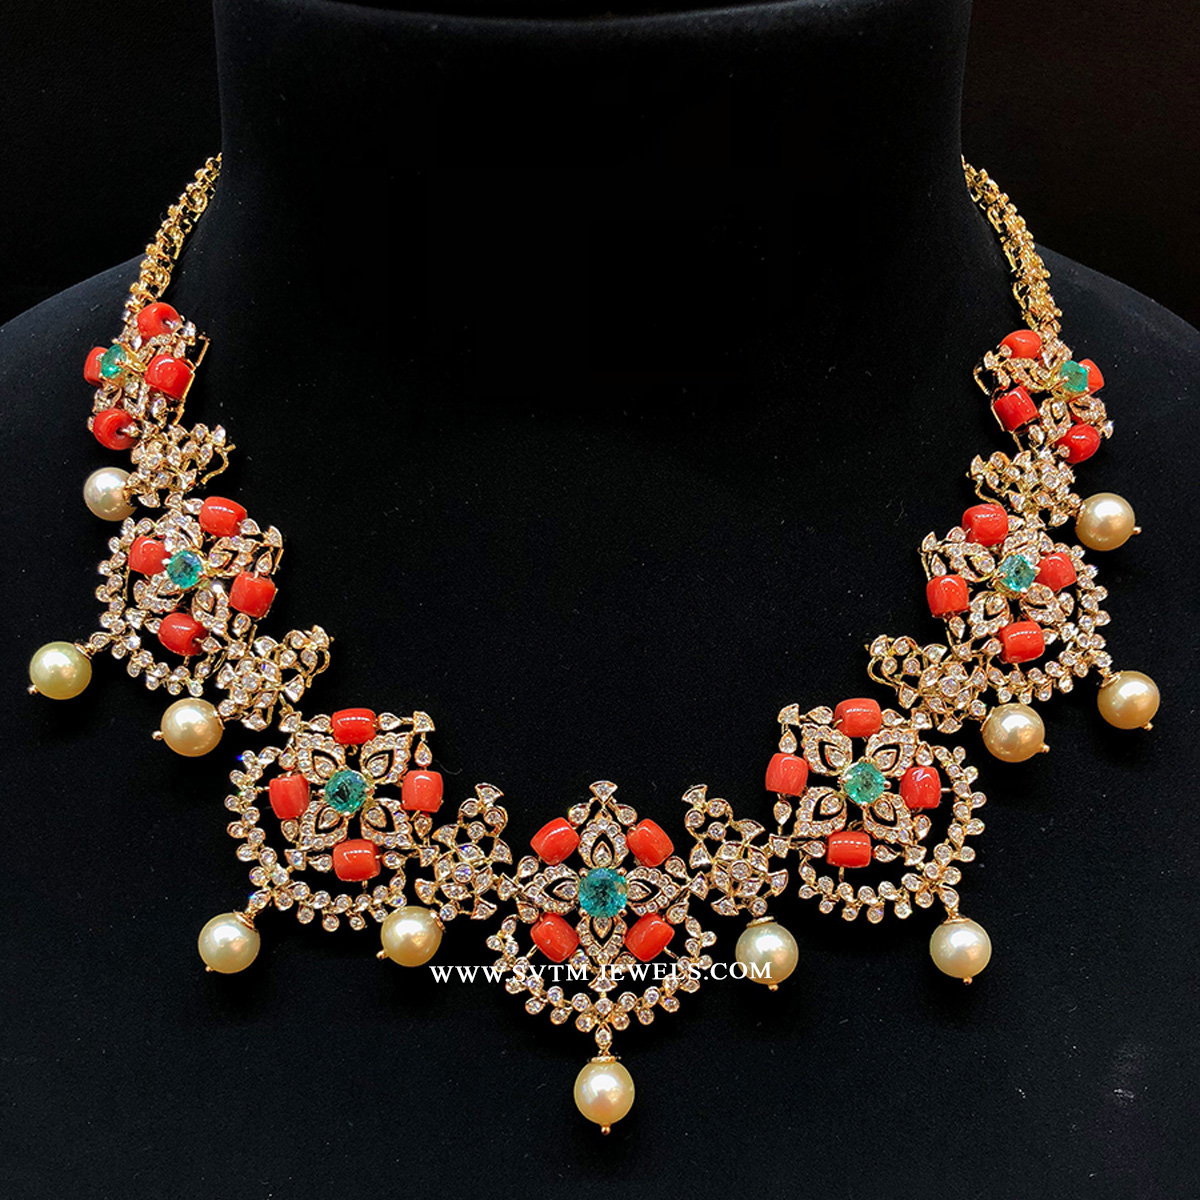 Eye-catching Coral Necklace